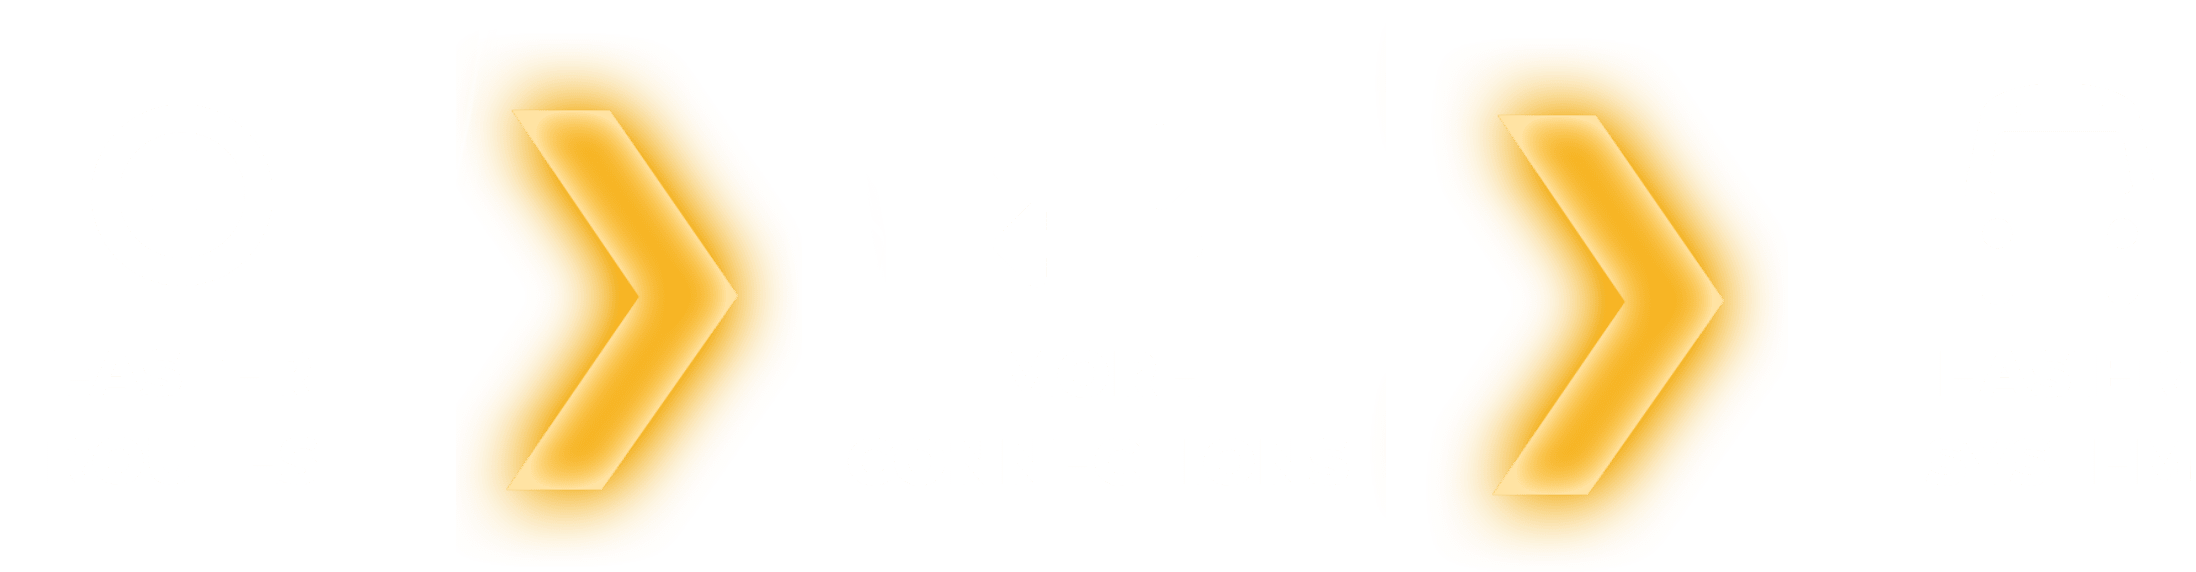 More Connections > Faster Routes > Easier System